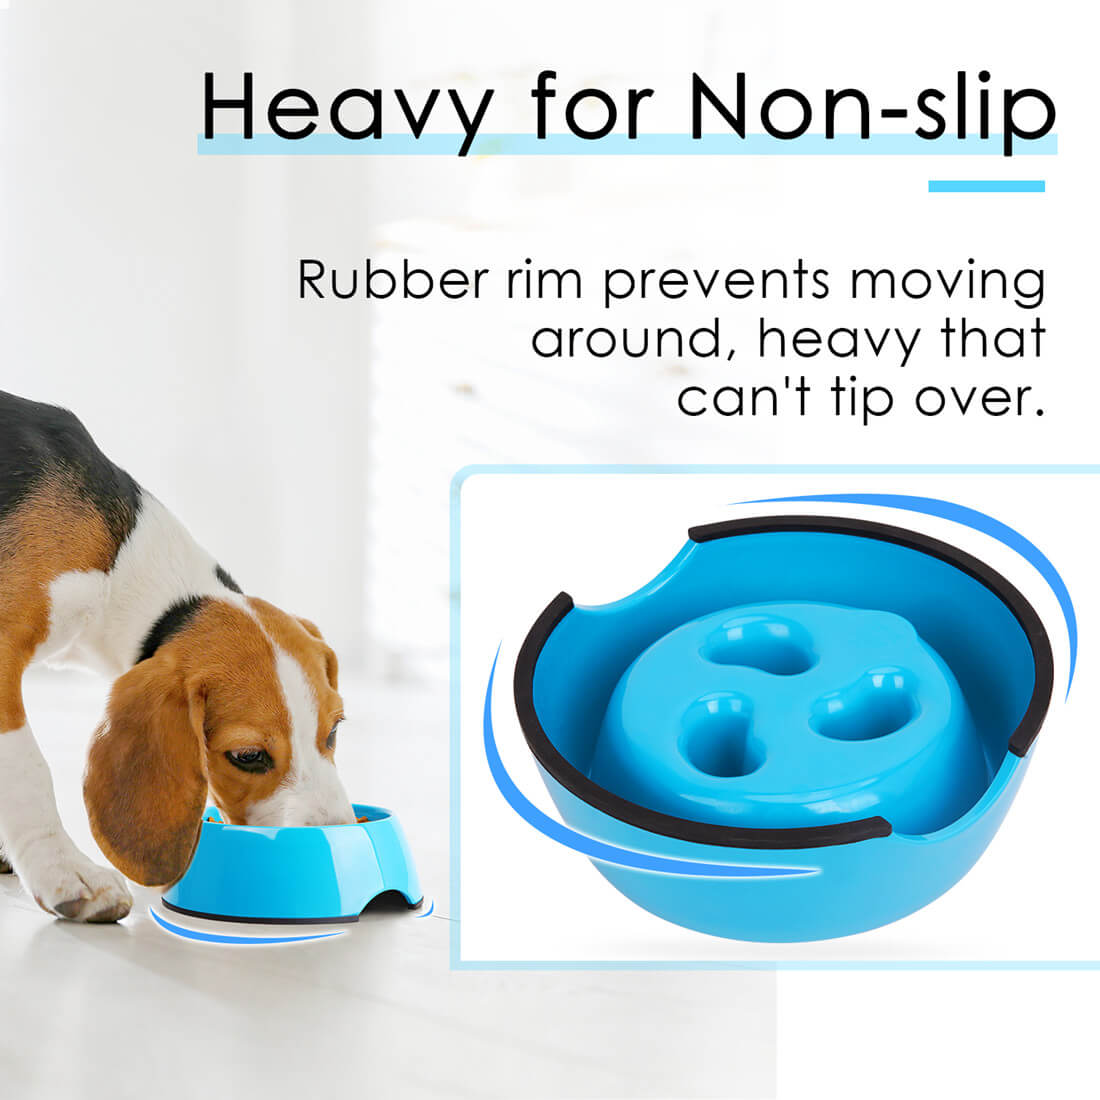 NOYAL Slow Feeder Dog Bowls Puzzle Anti-Gulping Interactive Bloat Durable  Preventing Choking Healthy Dogs Bowl Blue